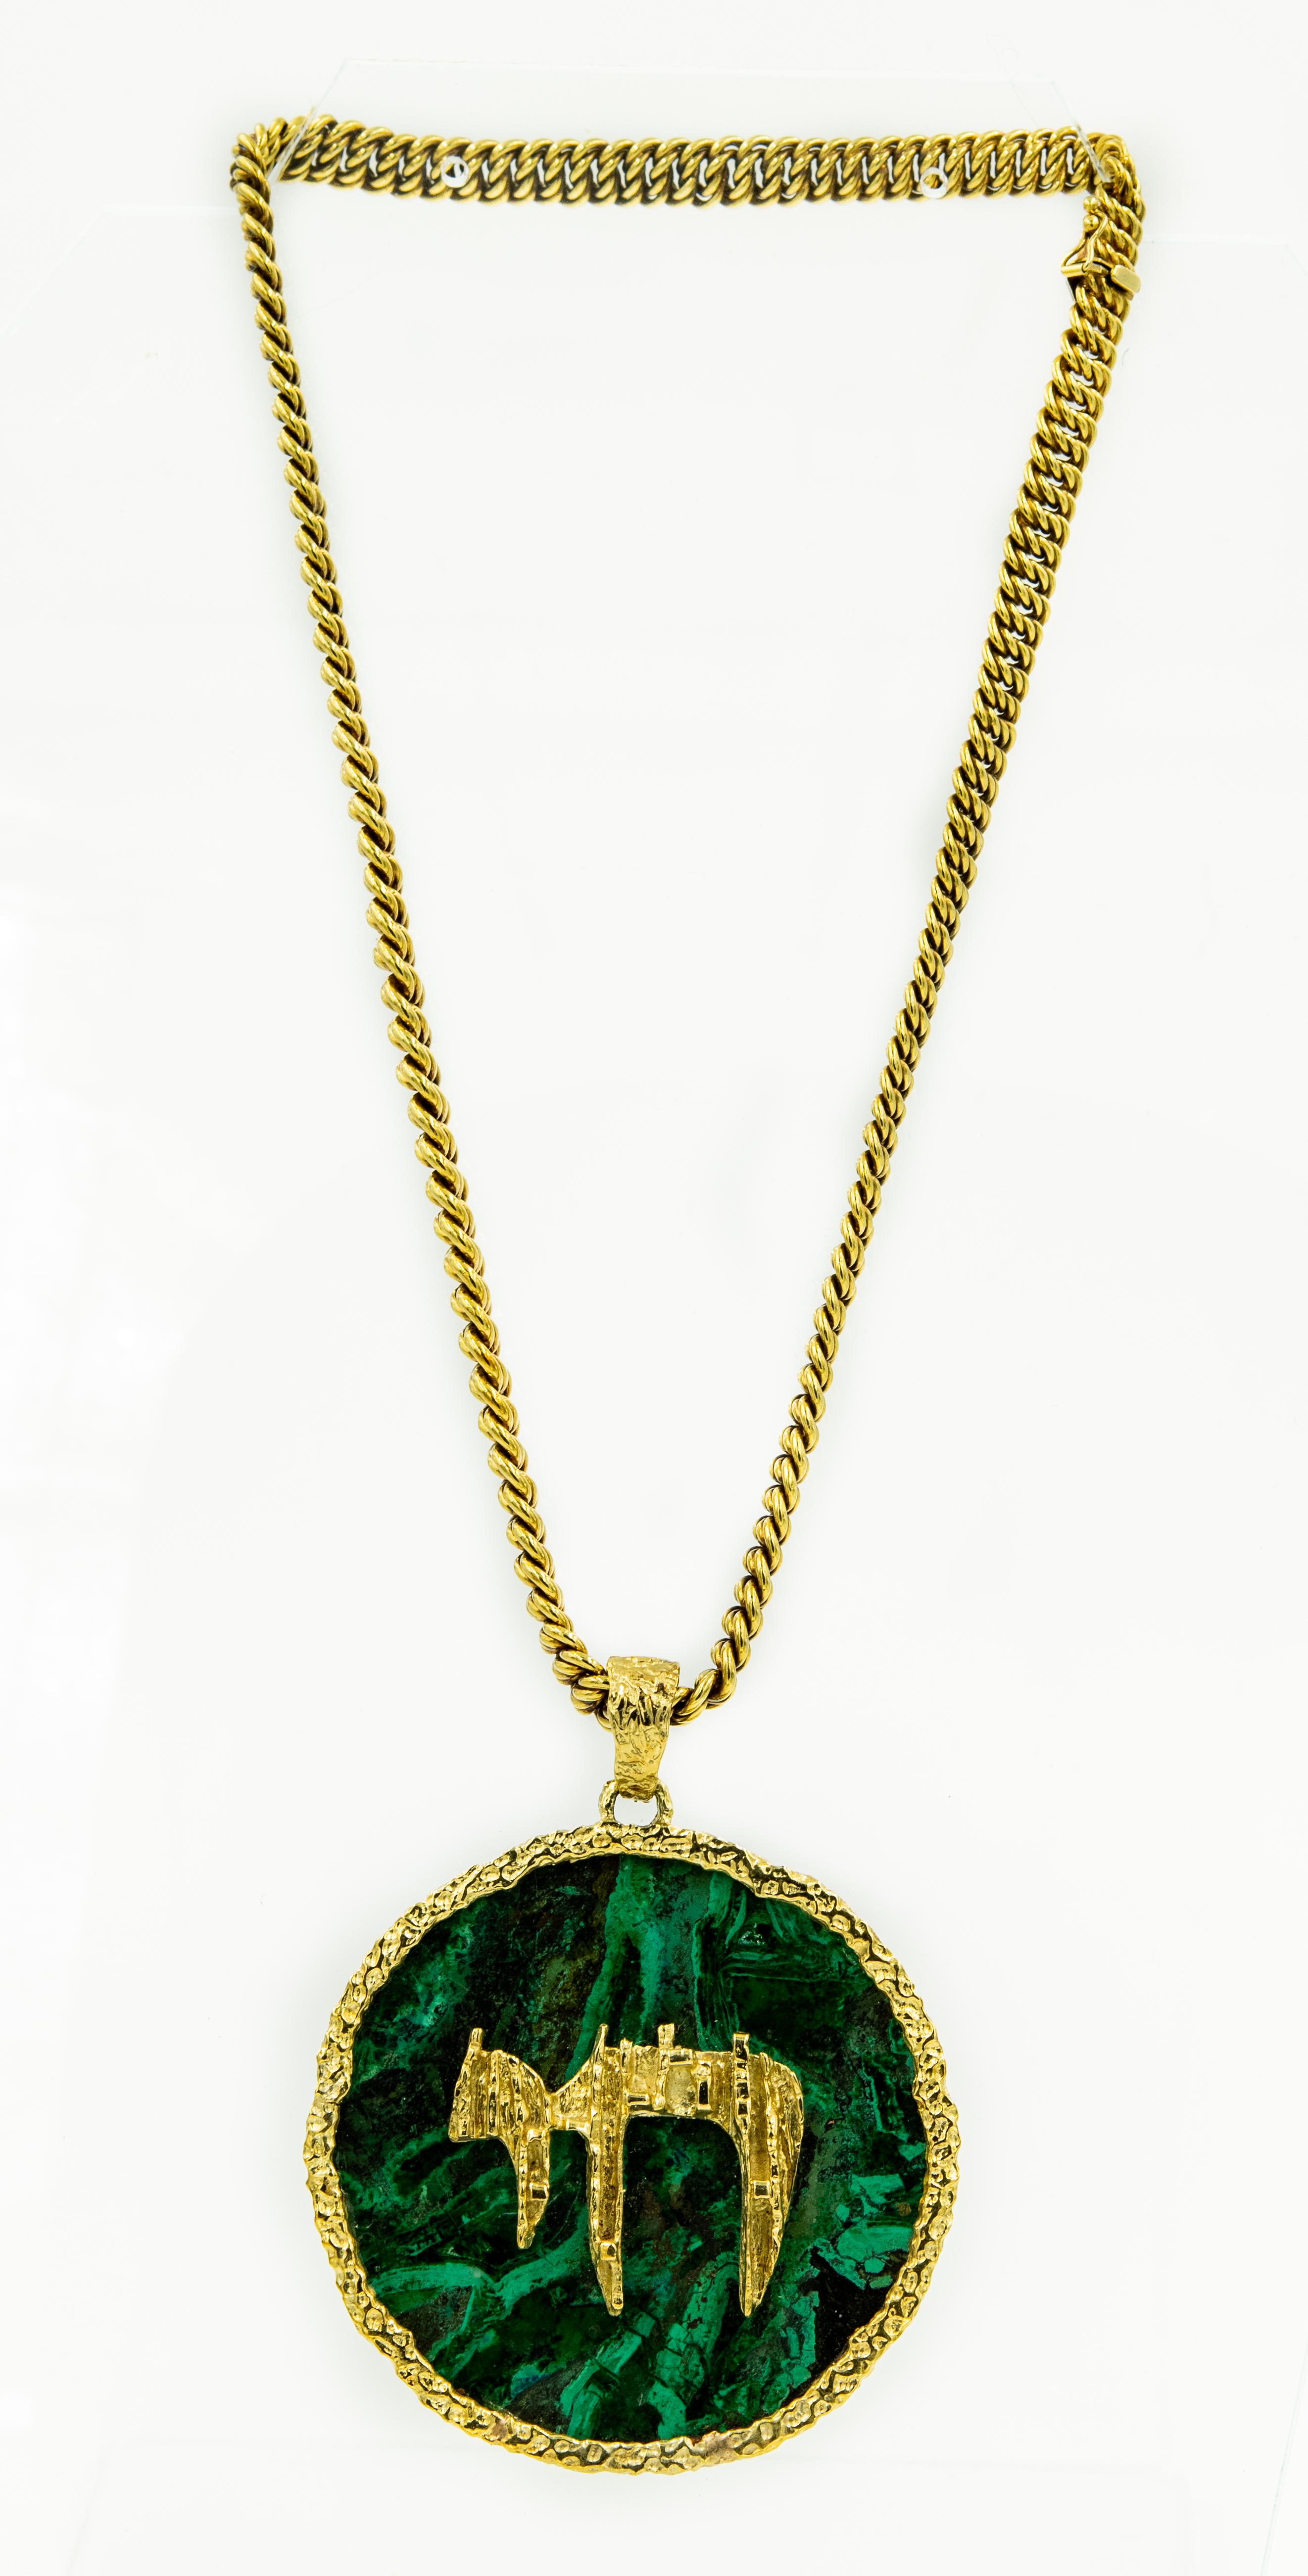 This impressive Jewish Chai necklace from Miami Rabbi Irving and Belle Lehrman's estate.  The pendant is in the brutalist style featuring a round piece of malachite in a handmade frame with a melted gold Jewish Chai applied to the center with a wide